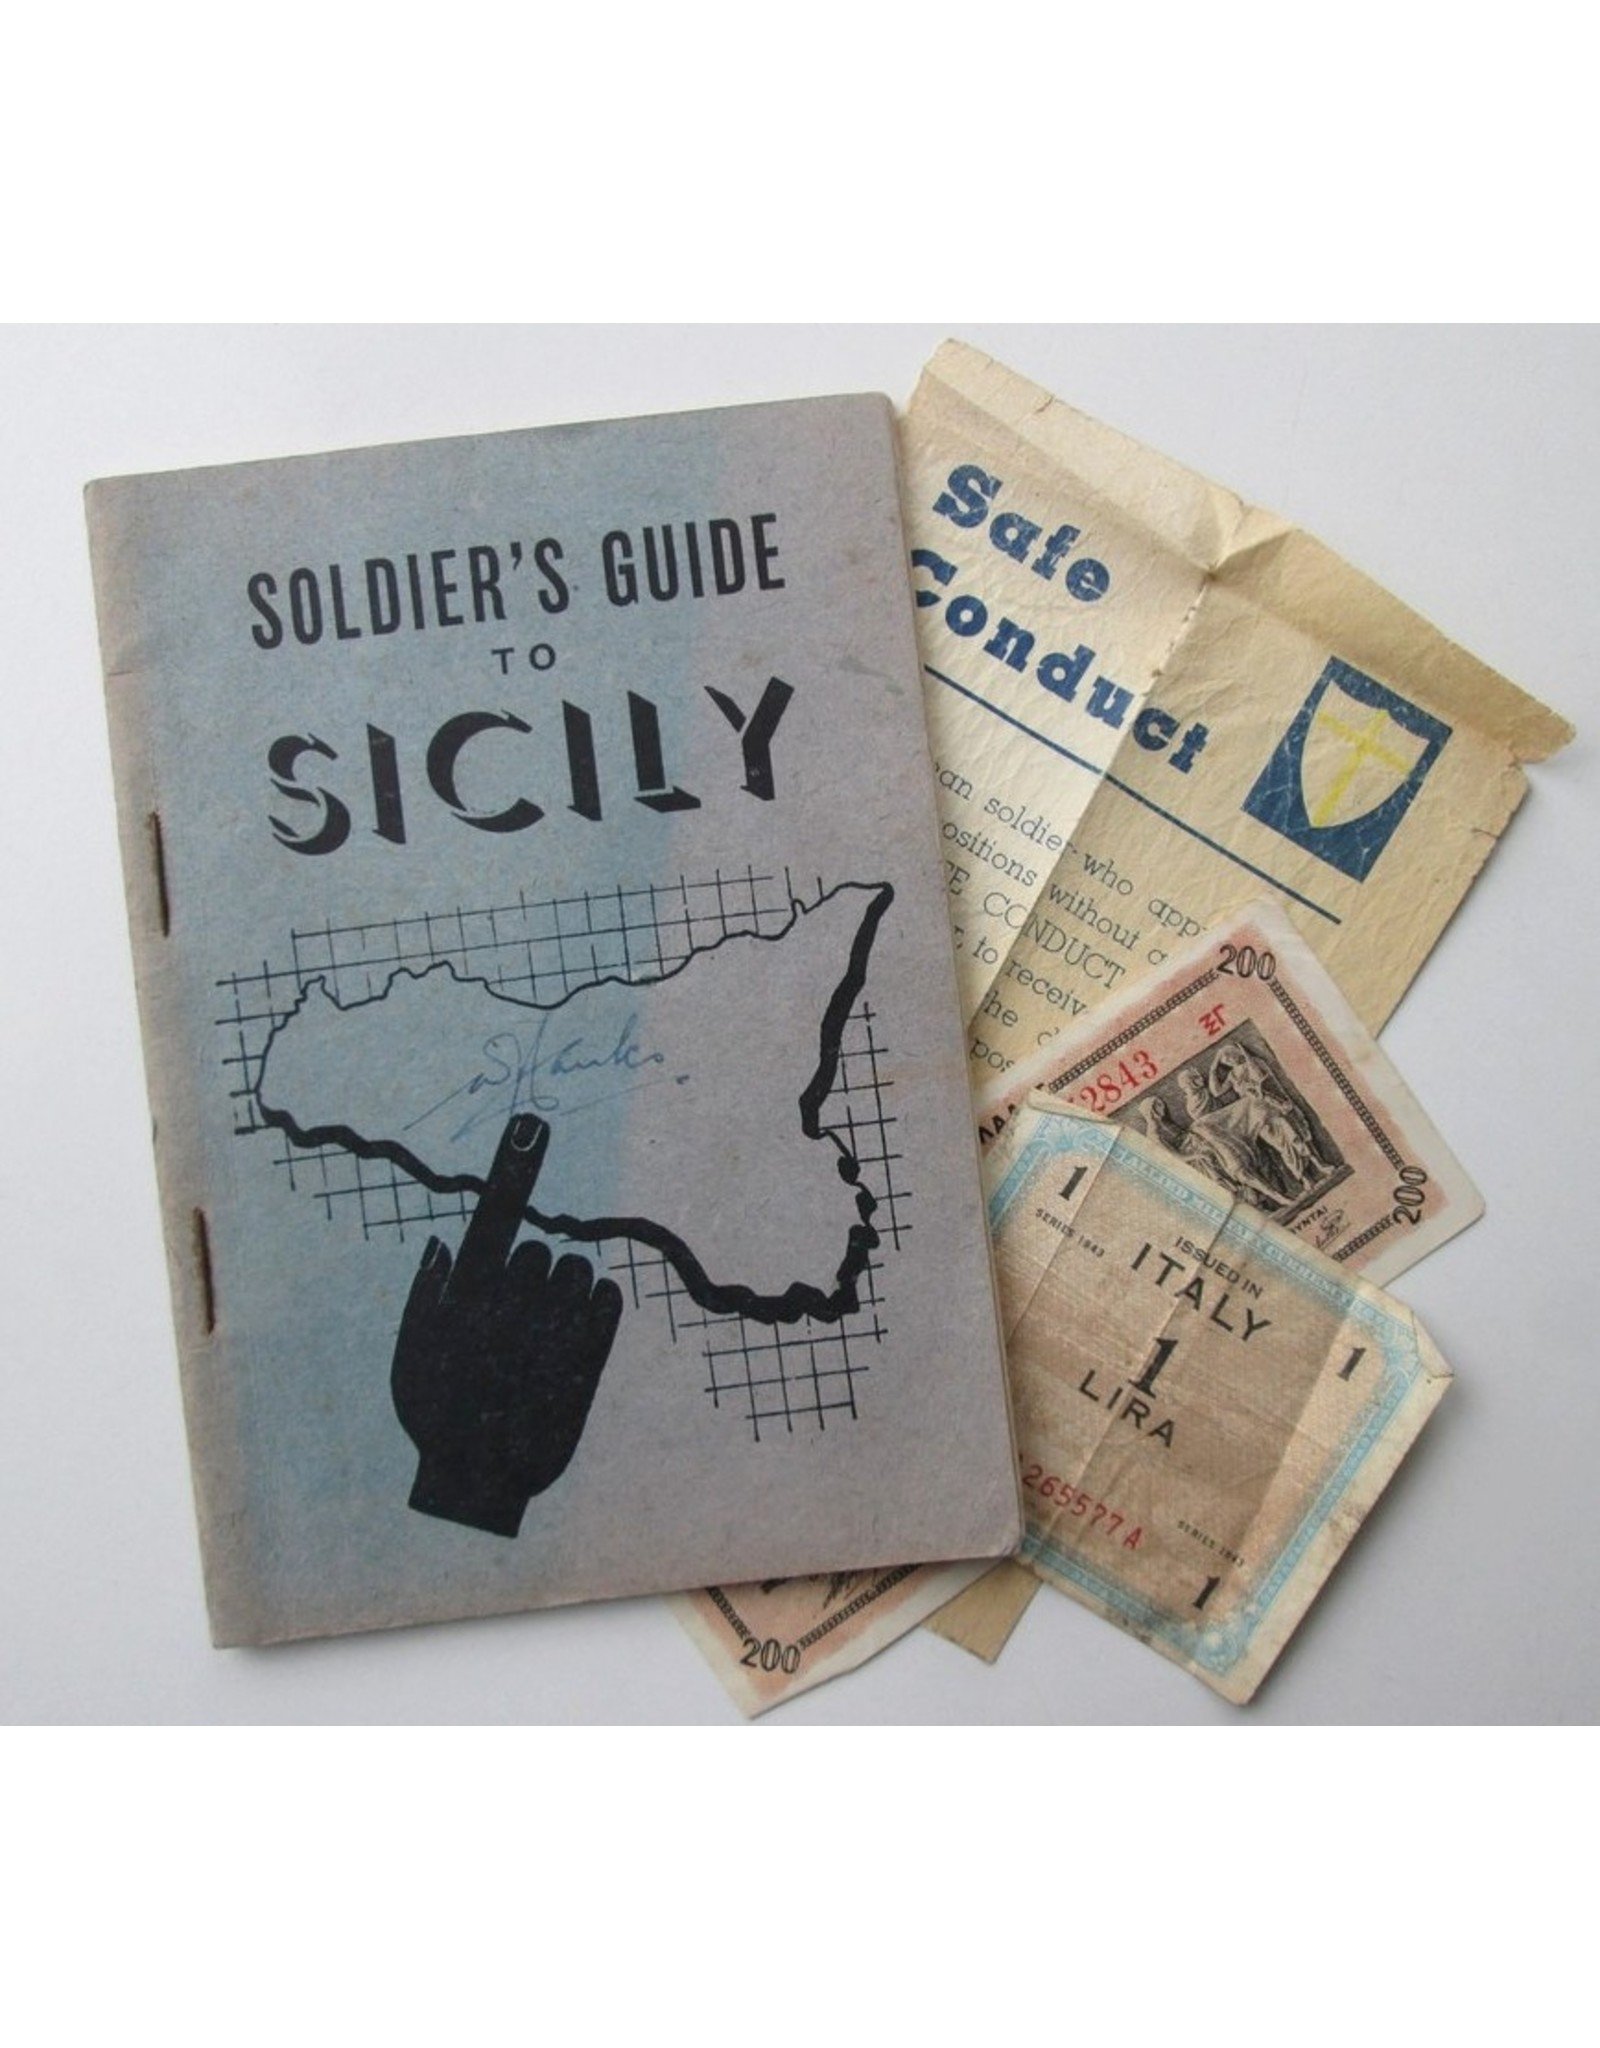 Dwight D. Eisenhower - Soldier's Guide to Sicily